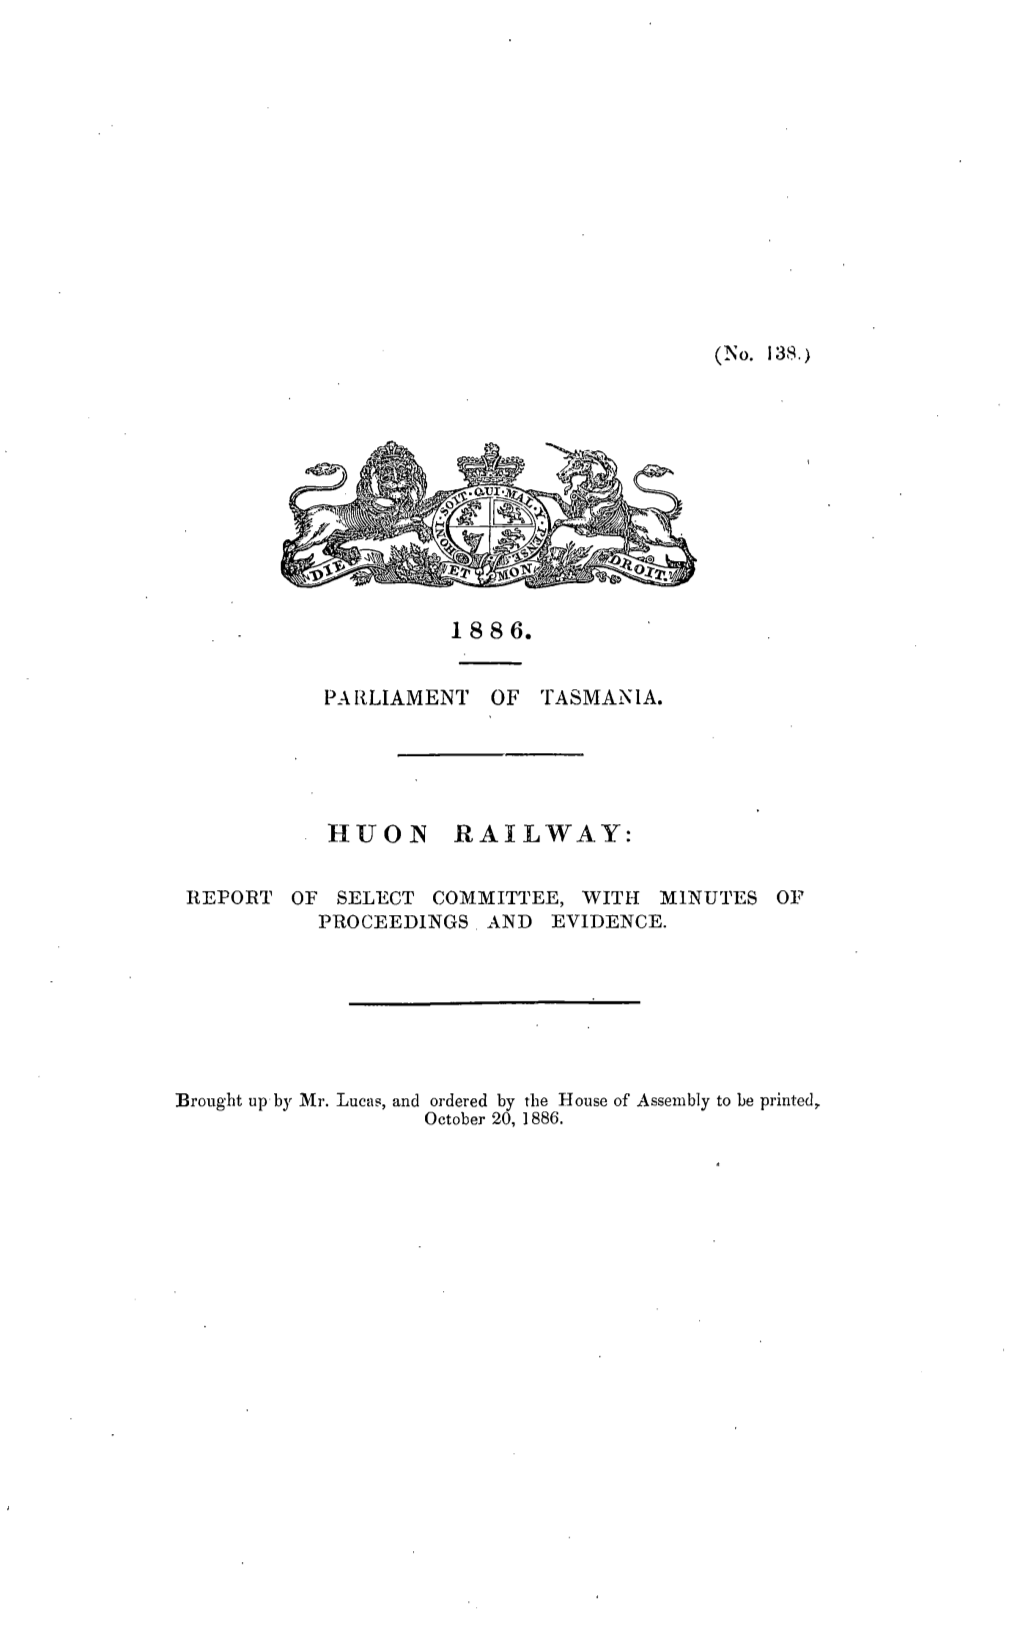 Huon Railway: Report of Select Committee, with Minutes Of